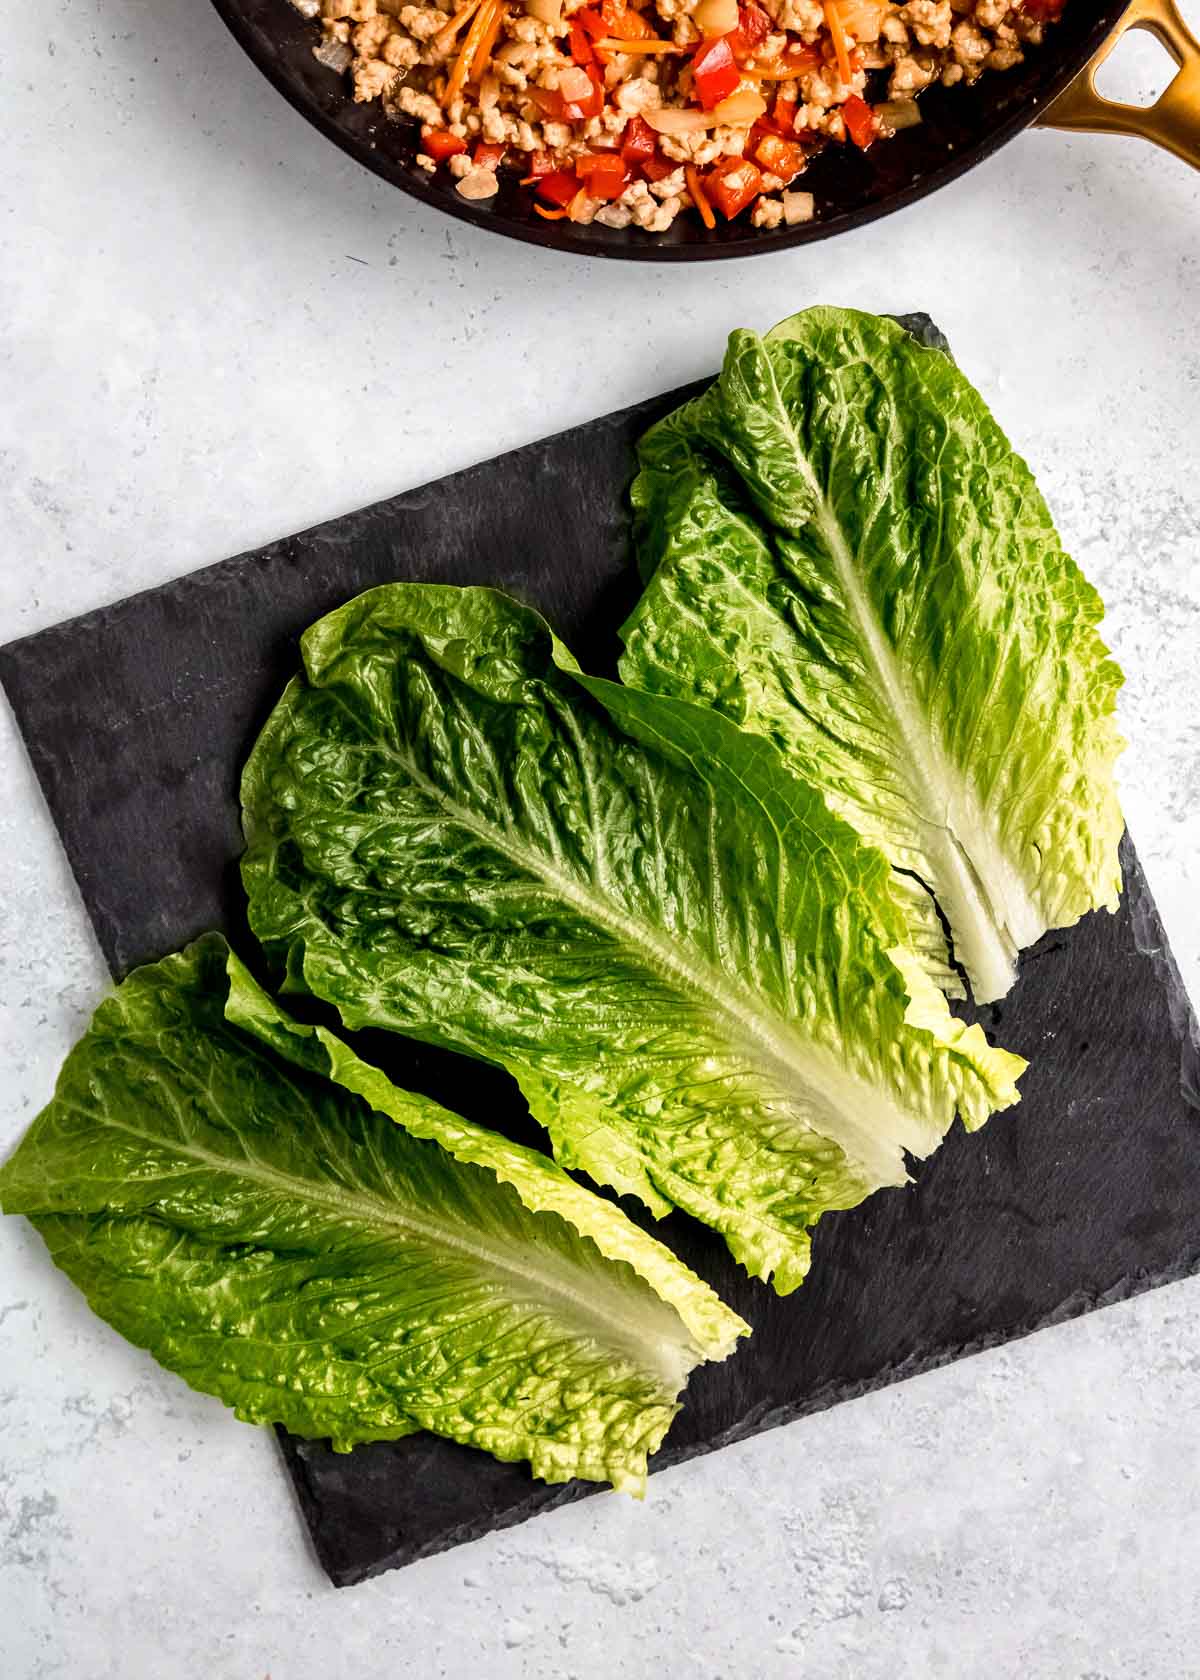 large romaine lettuce leaves on a cutting board